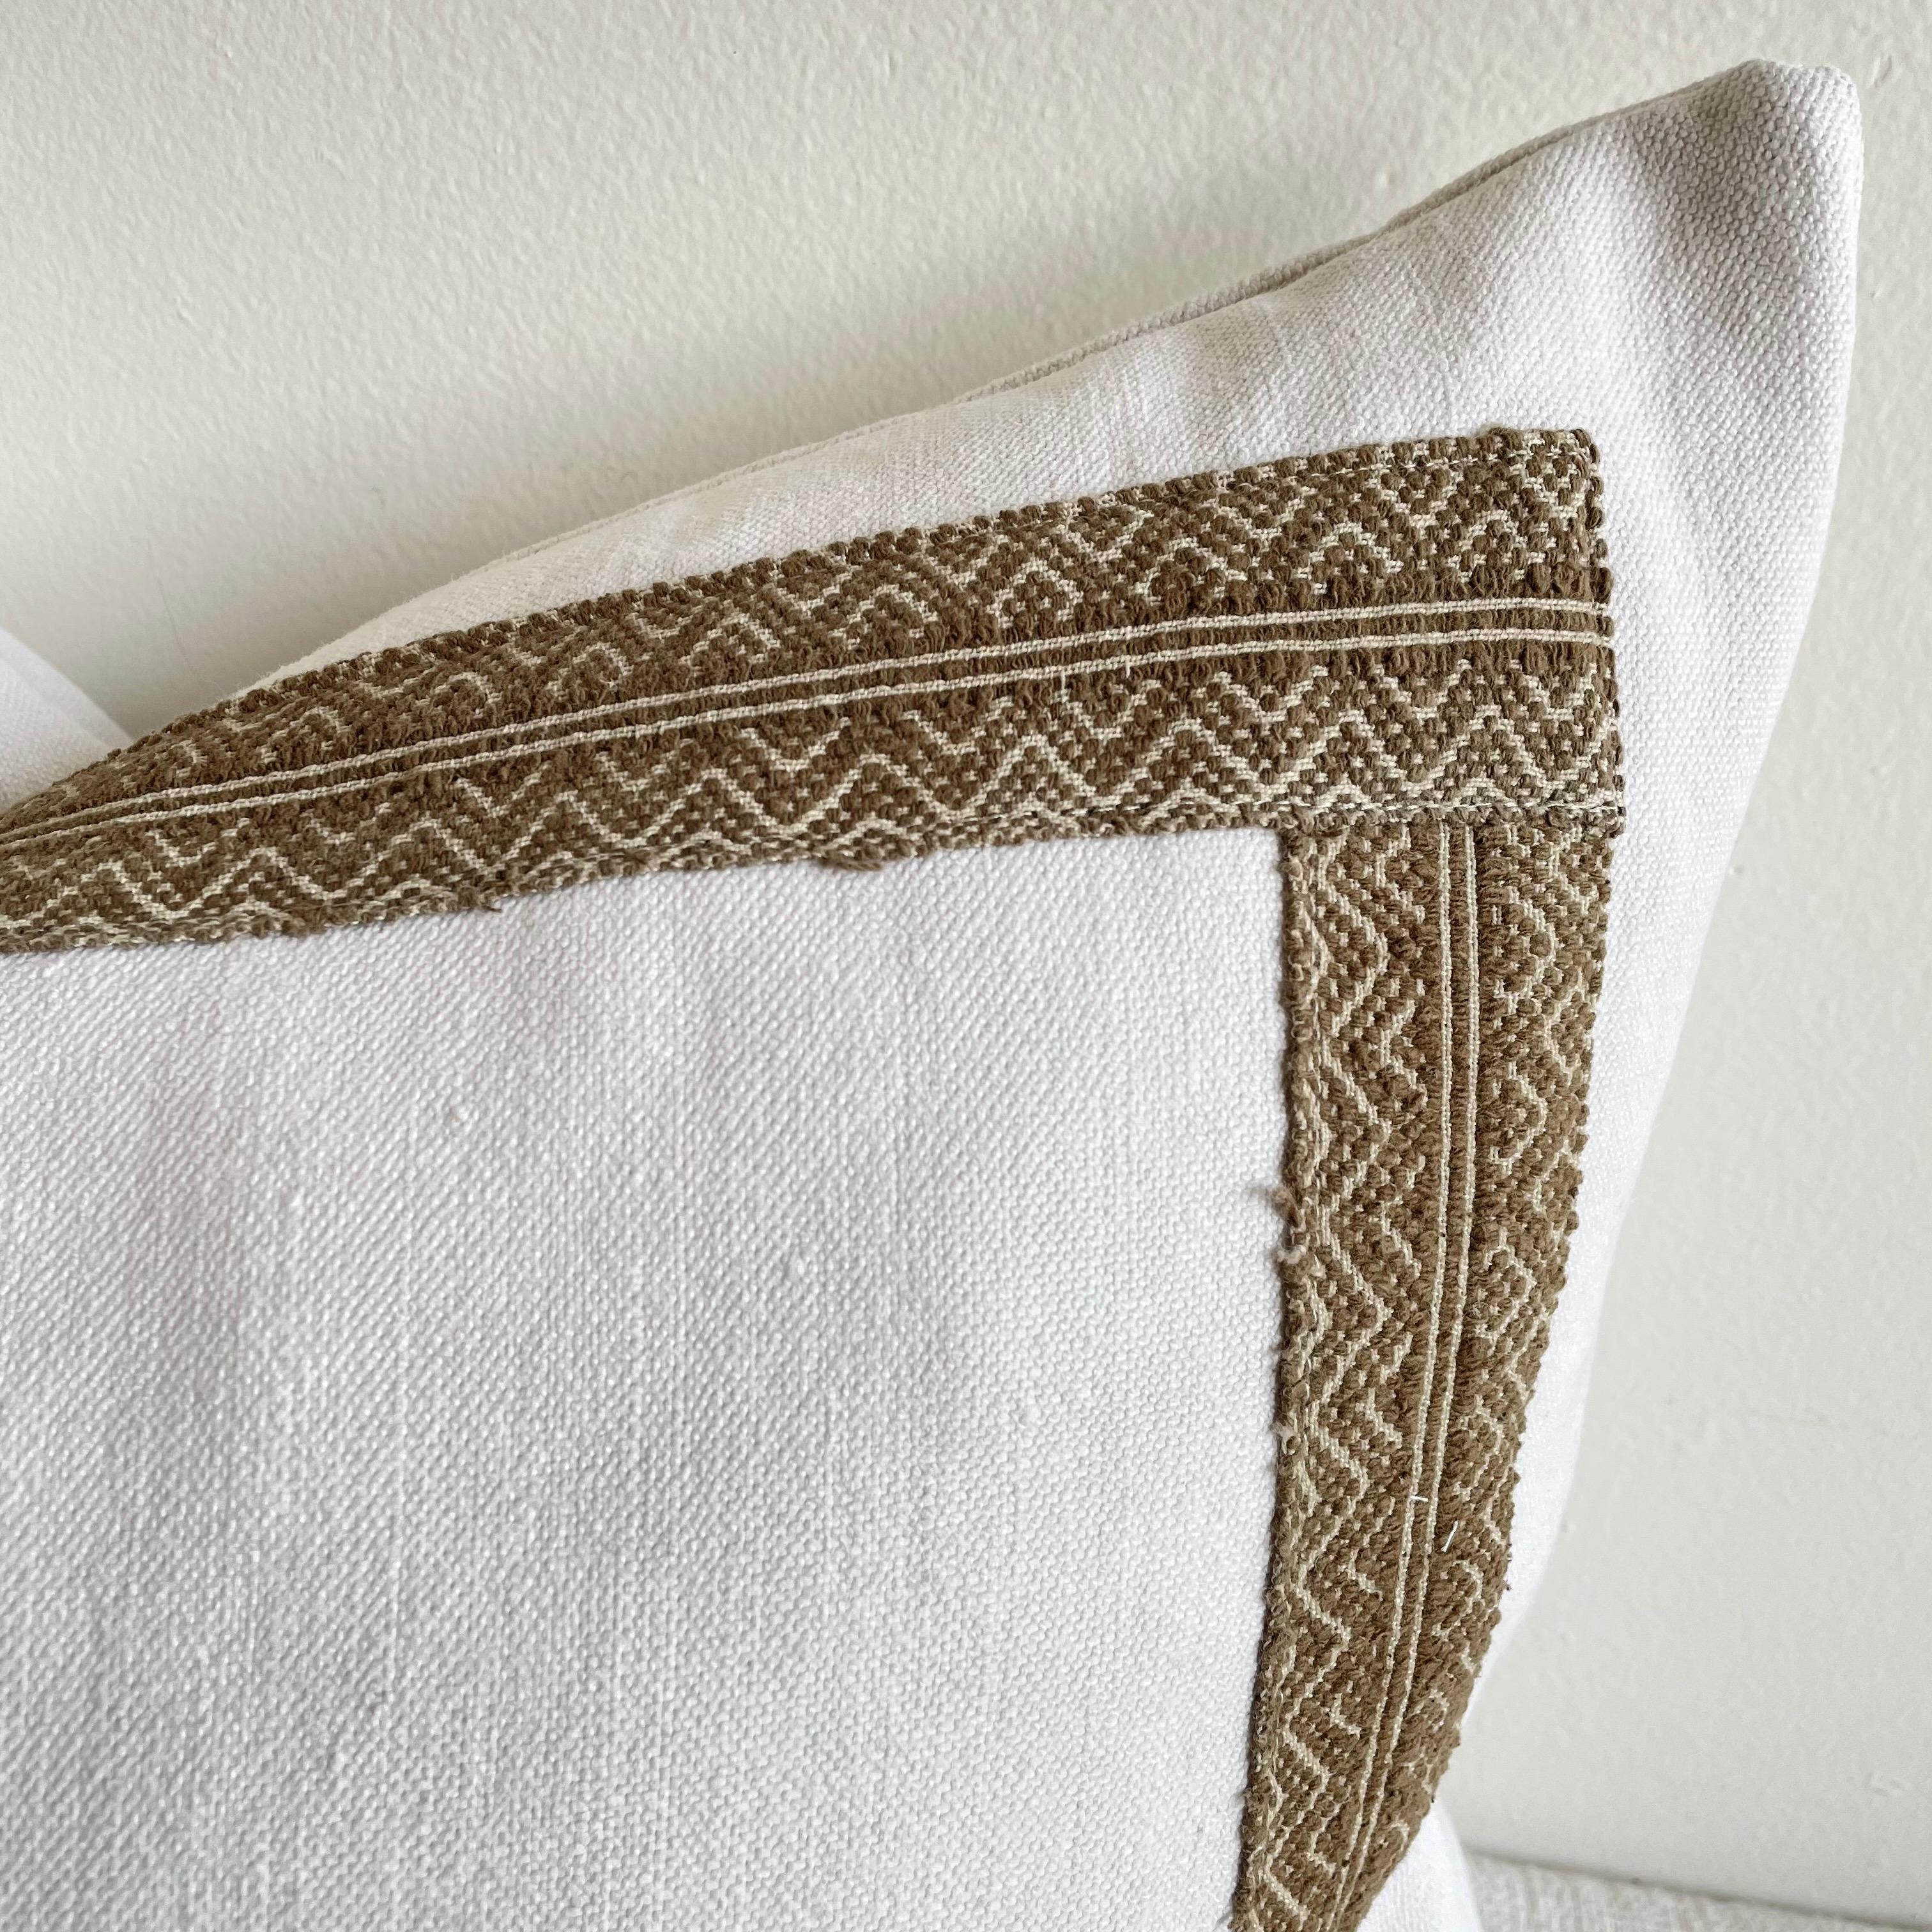 This vintage textile pillow face features a 100 year old linen with brown woven 2